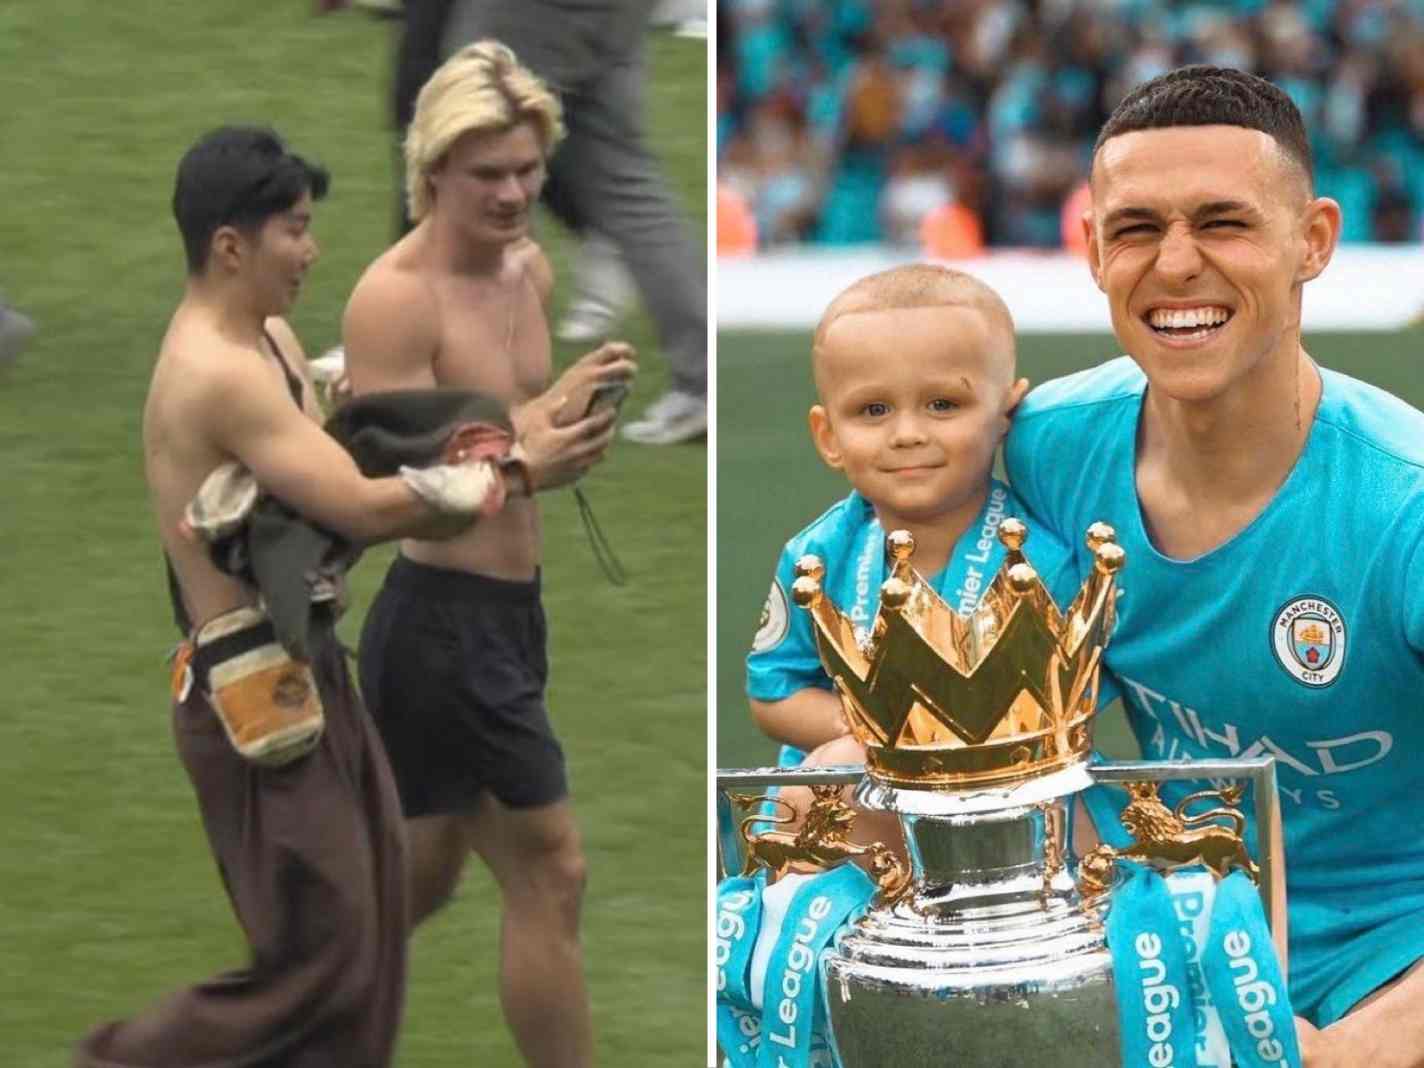 City Fan Looks Just Like Erling Haaland, While Phil Foden’s Son Is Mini-Vincent Kompany